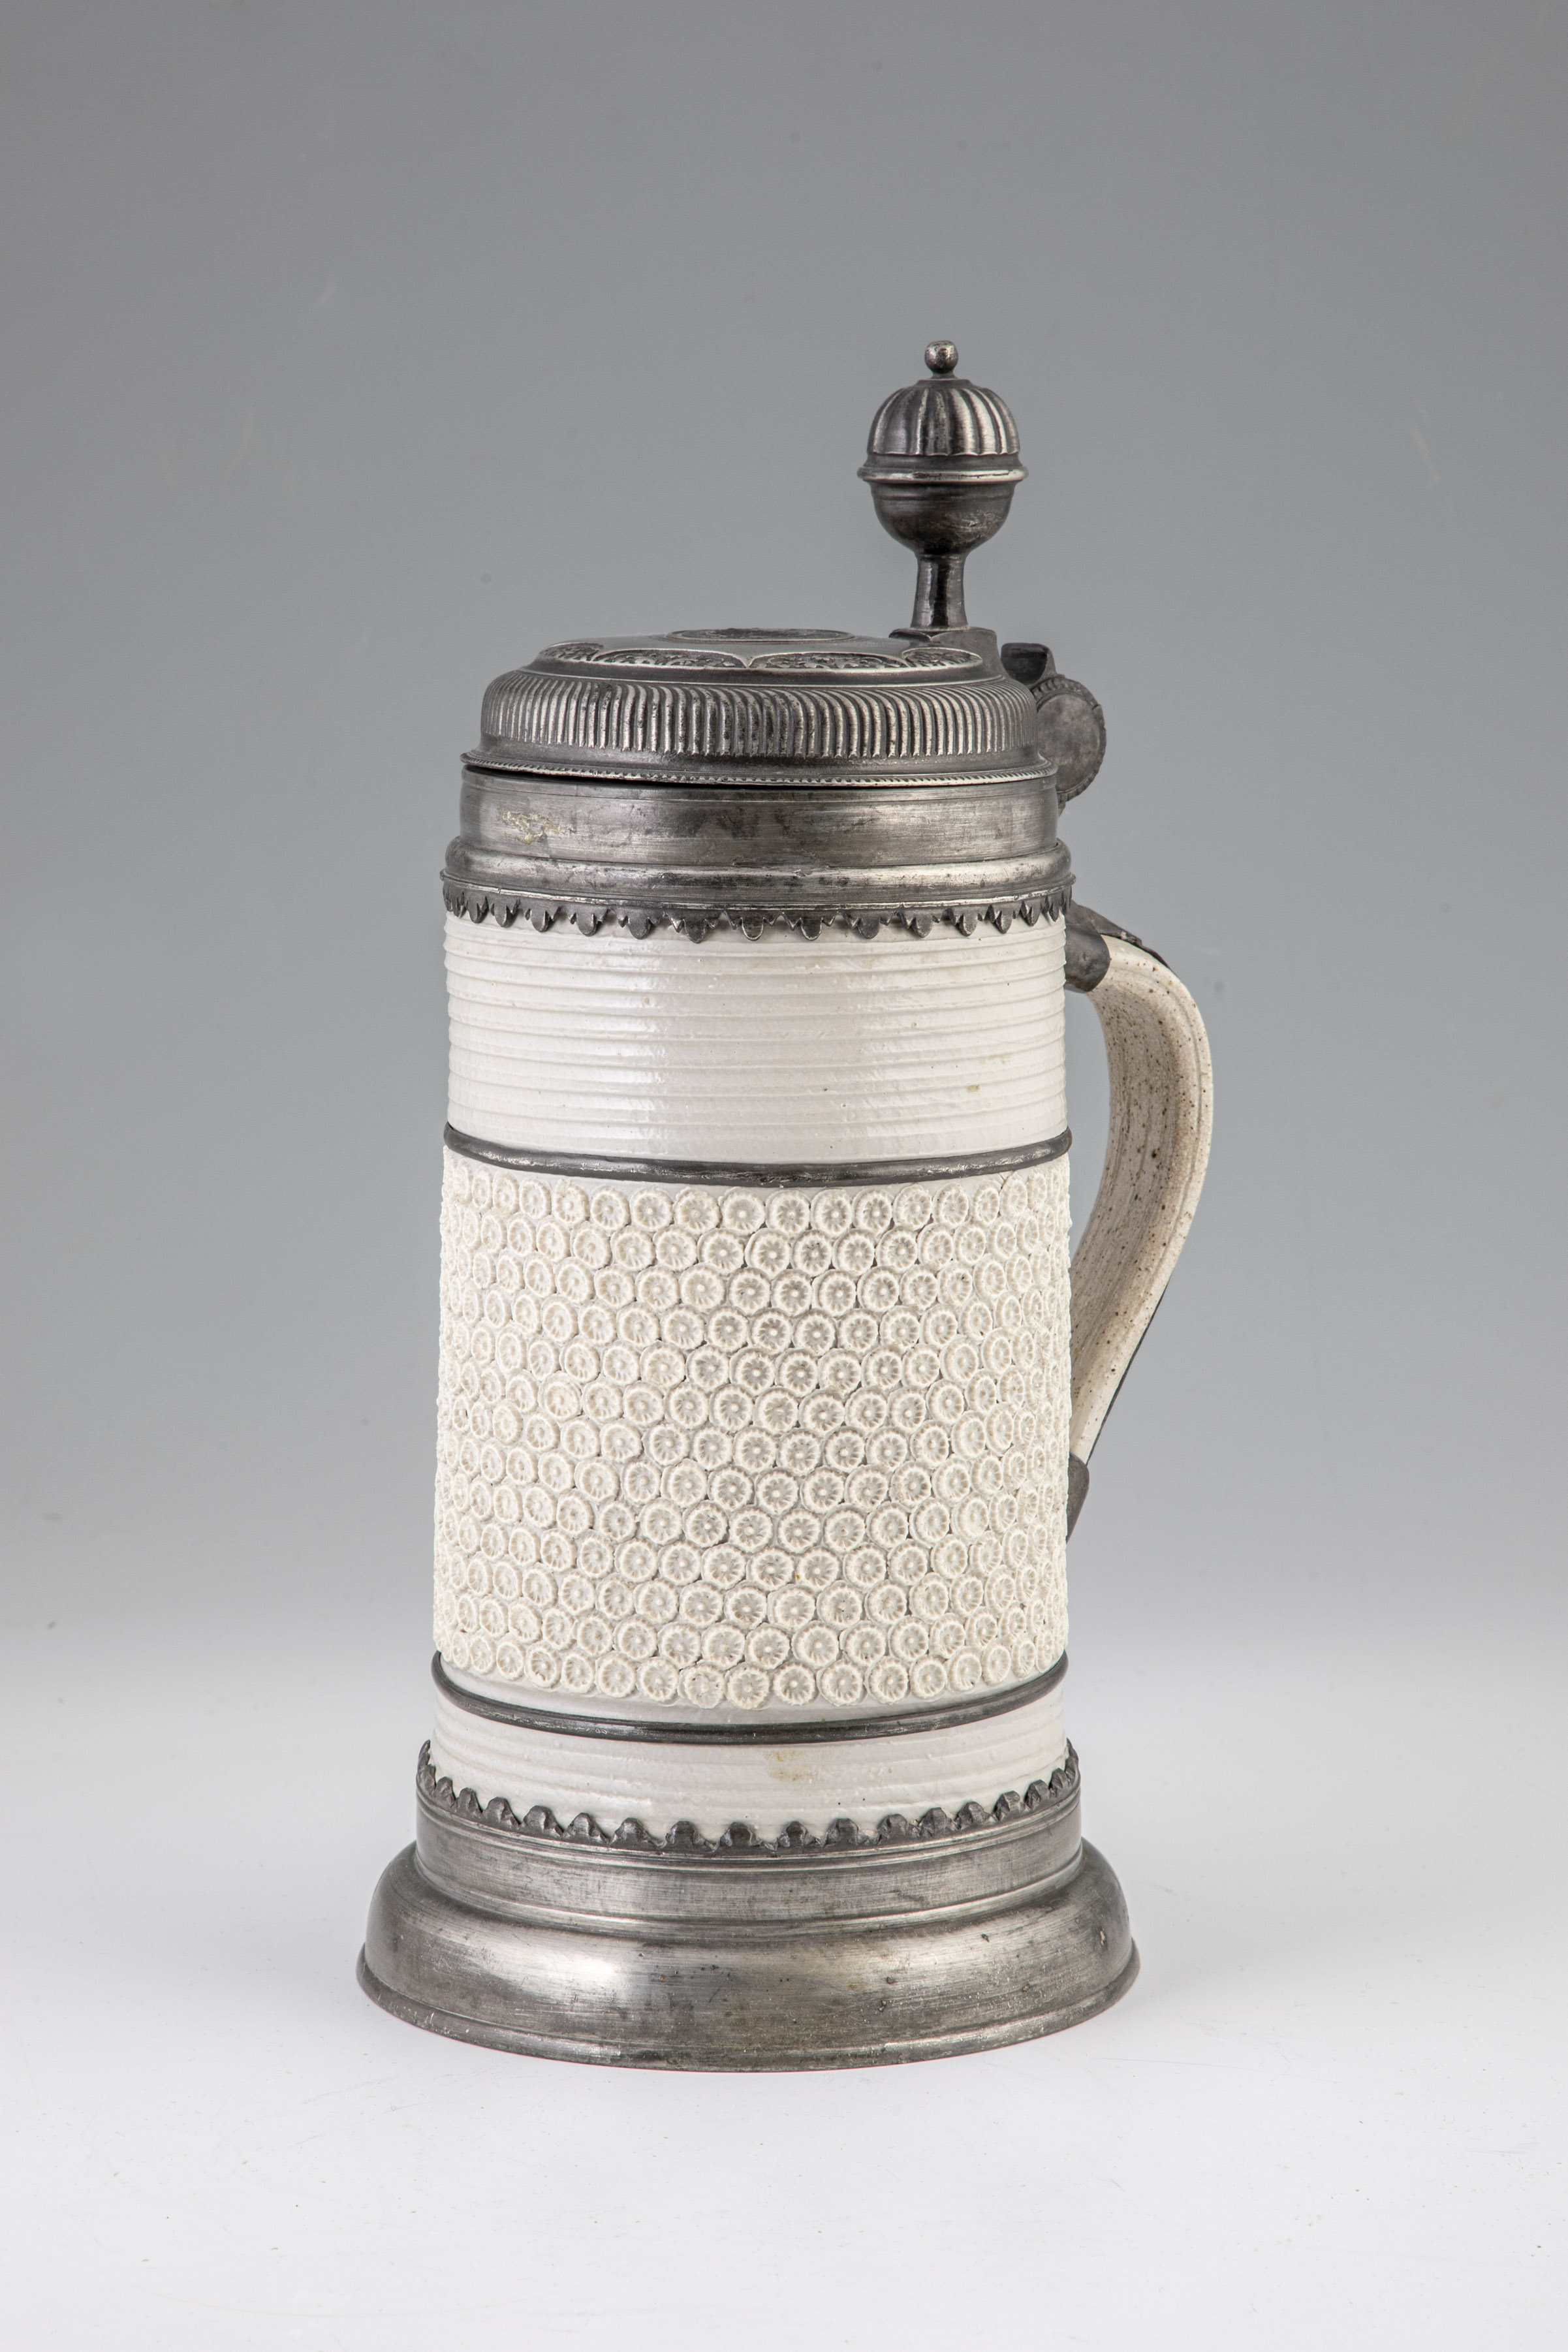 Roller pitcher with pewter mount - Image 3 of 4